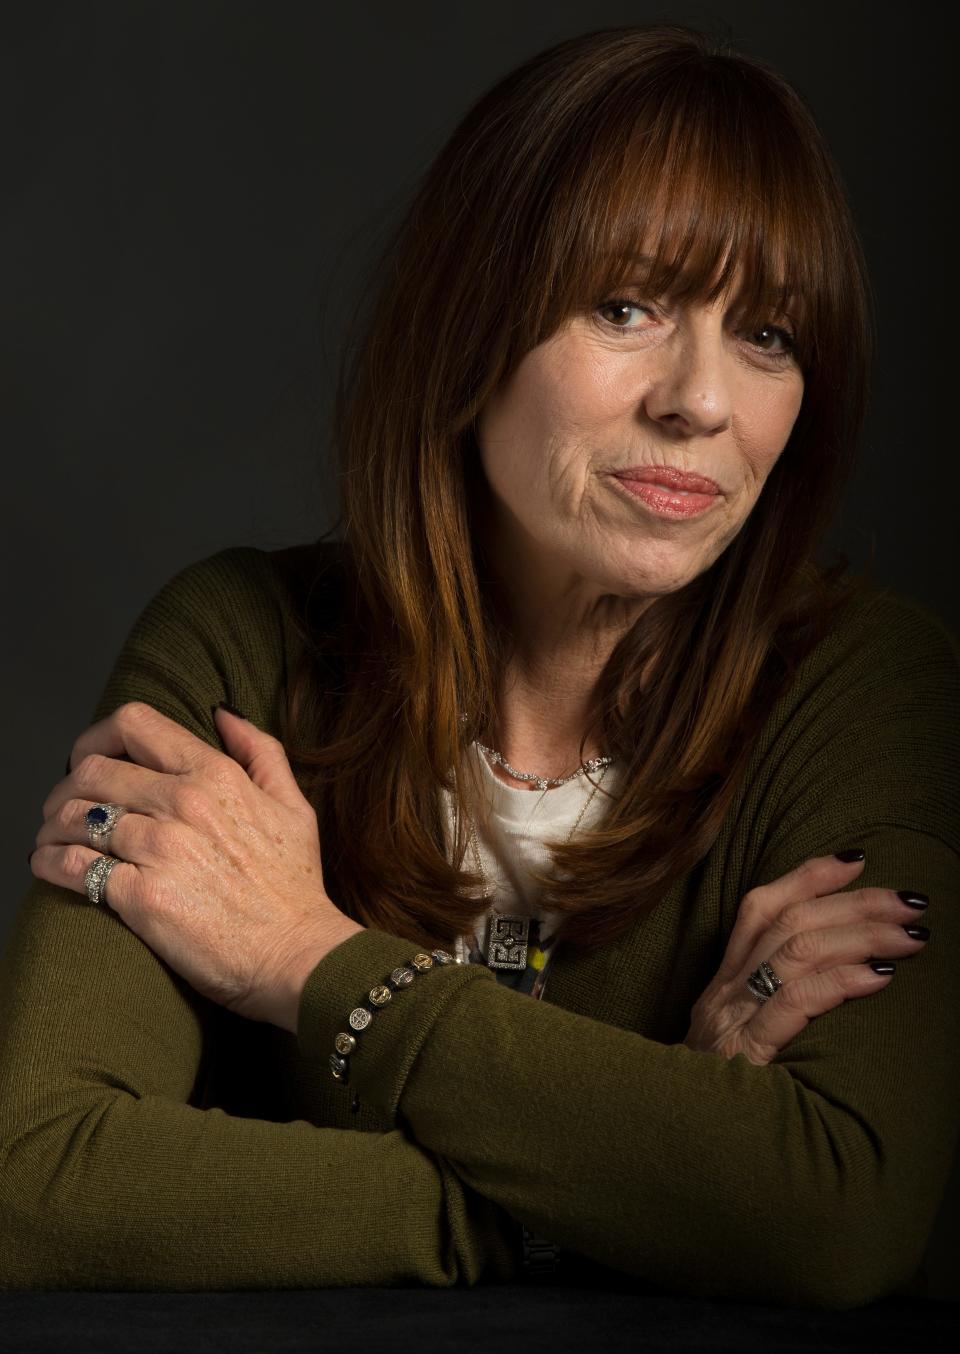 The one-time star of the sitcom "One Day at a Time" Mackenzie Phillips, who opened up about family secrets in her 2009 memoir, now works as a drug rehab counselor.